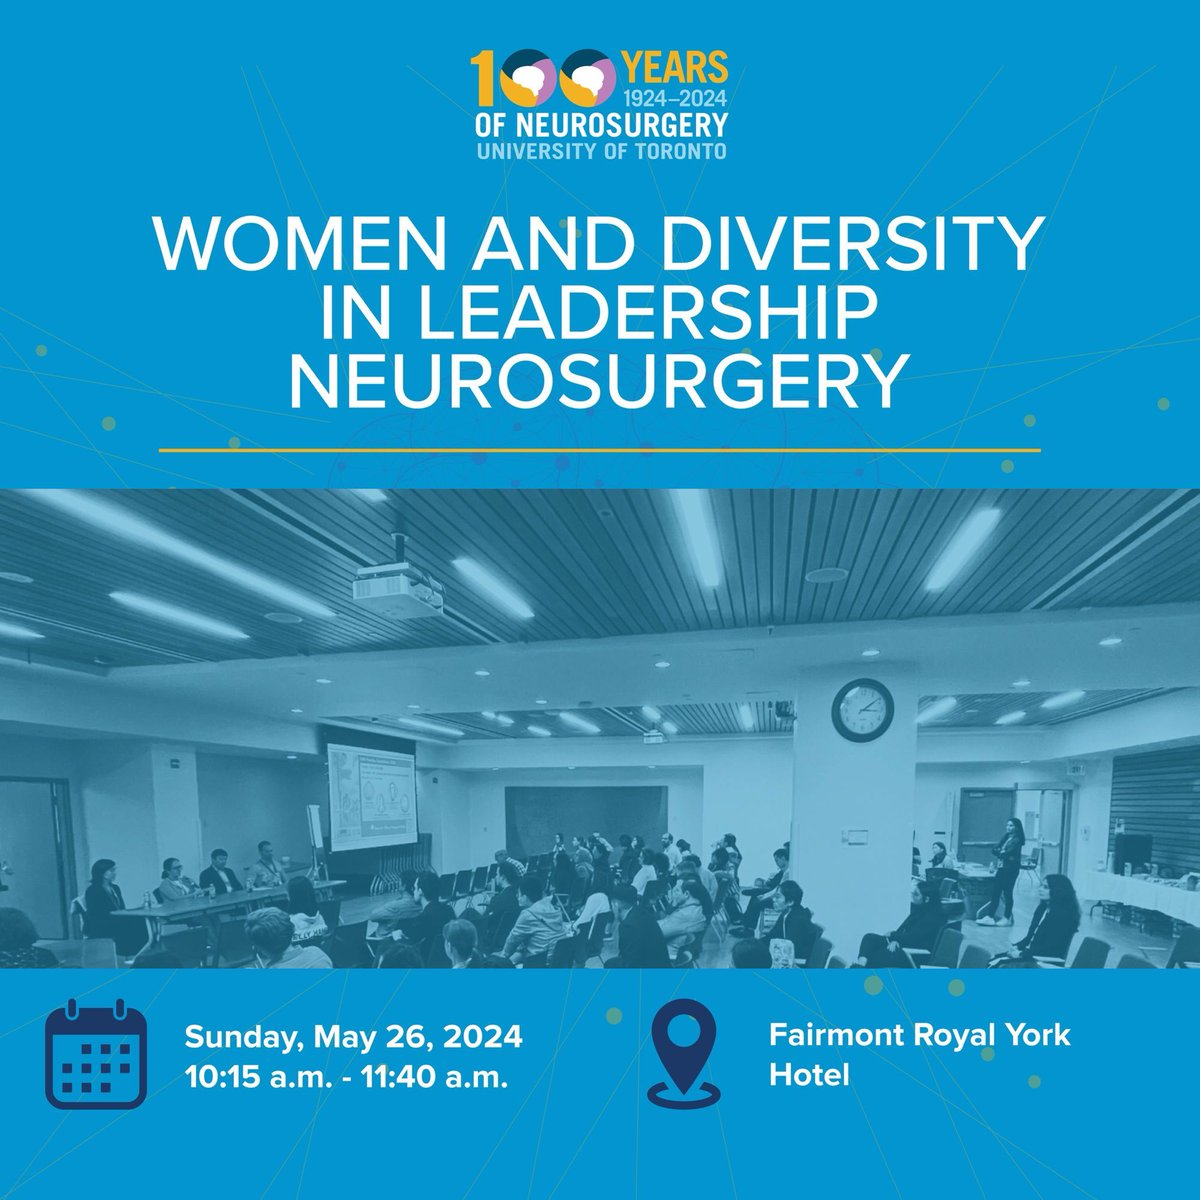 Join our upcoming event ‘#Women and #Diversity in #Leadership #Neurosurgery’ as part of our 100th anniversary! This session will be moderated by @gelarehzadeh and Jennifer Moliterno Günel. Learn more or register: bit.ly/3xNkOEH